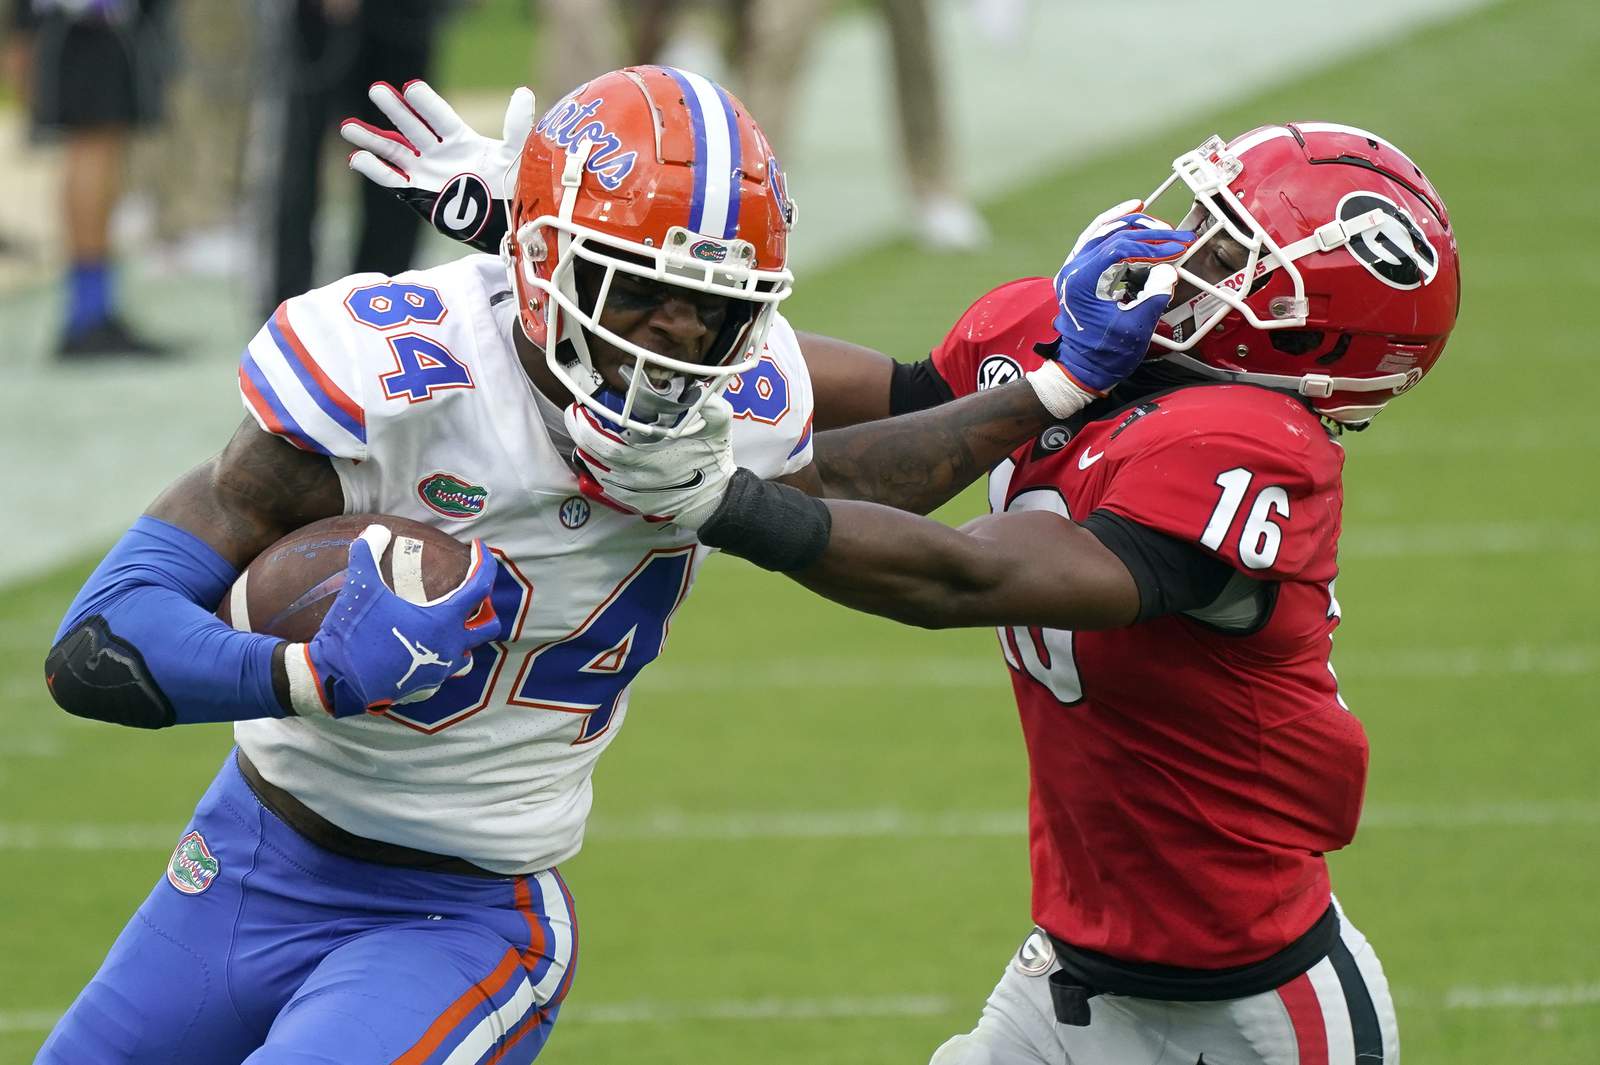 Trask, Florida upend Georgia 44-28 in 'Cocktail Party'